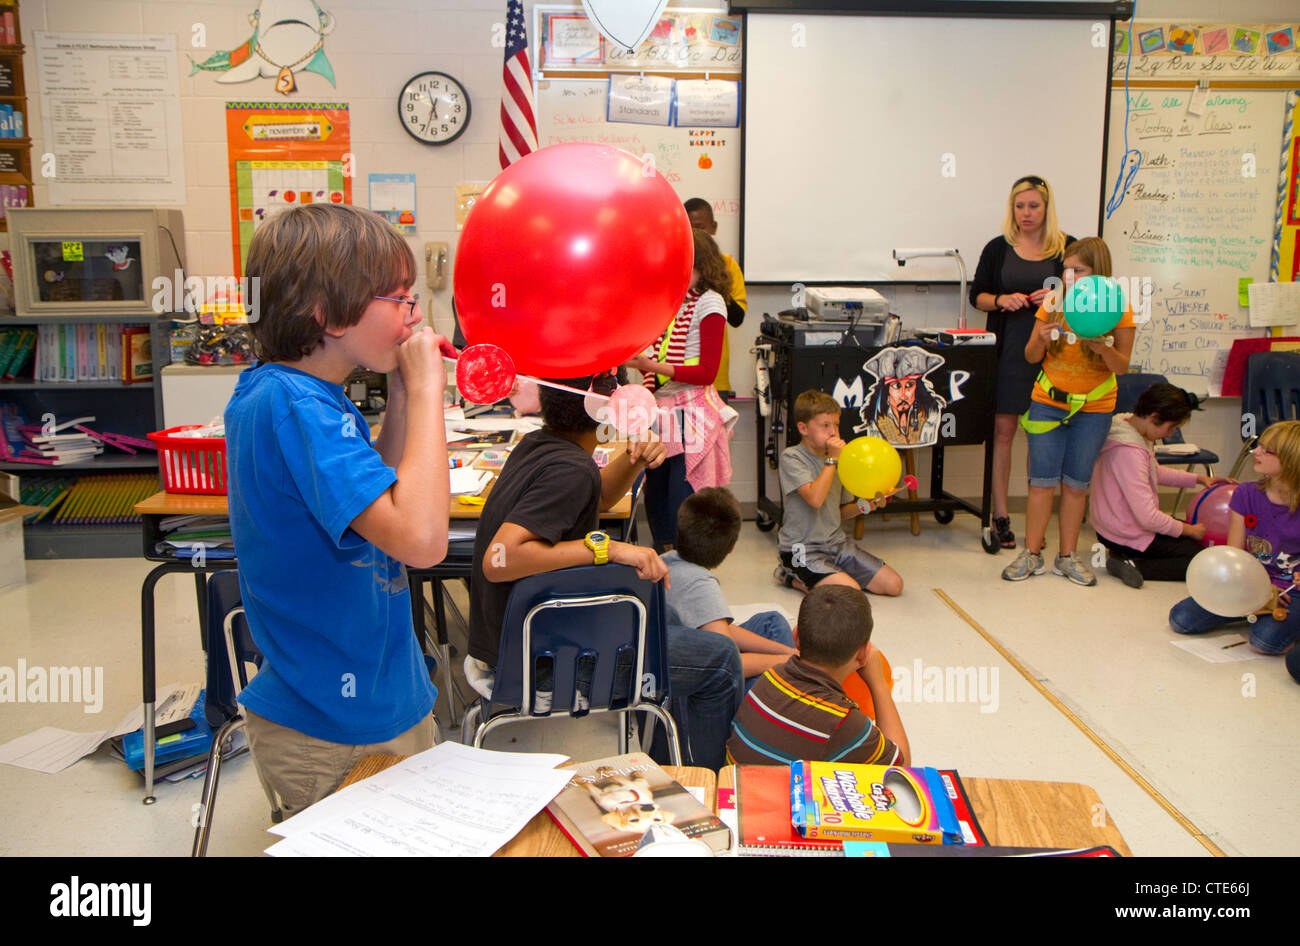 Student blowing up a balloon as part of a science experiment at a public elementary school in Brandon, Florida, USA. Stock Photo